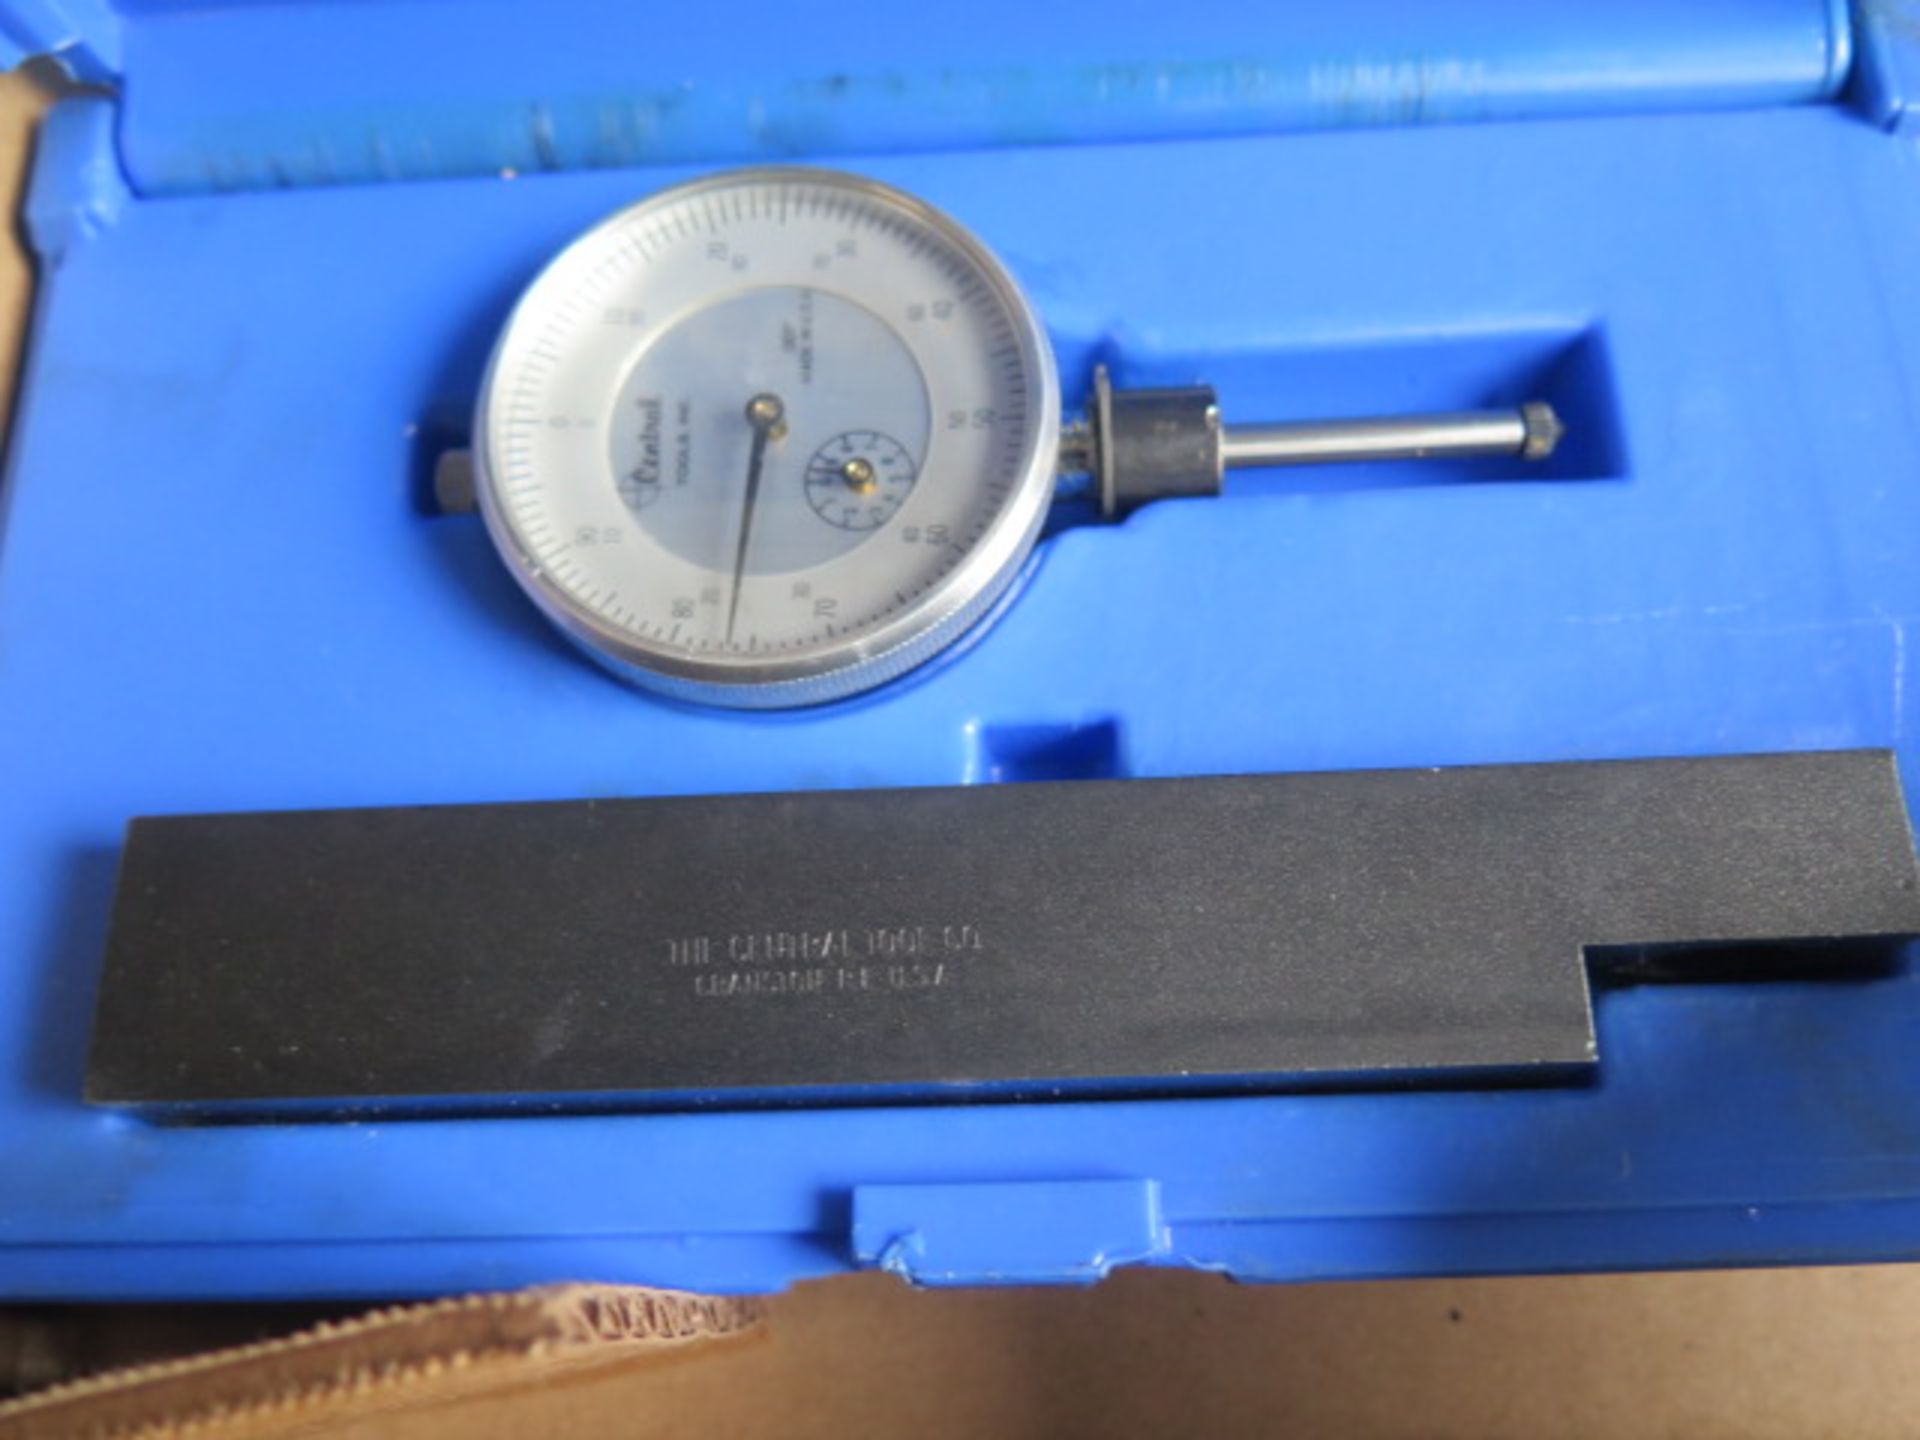 Central 0-3" Depth Mic, Mitutoyo Dial Snap Gage, Starrett 0-1" OD Mic, Dial Test Indicator and - Image 3 of 6